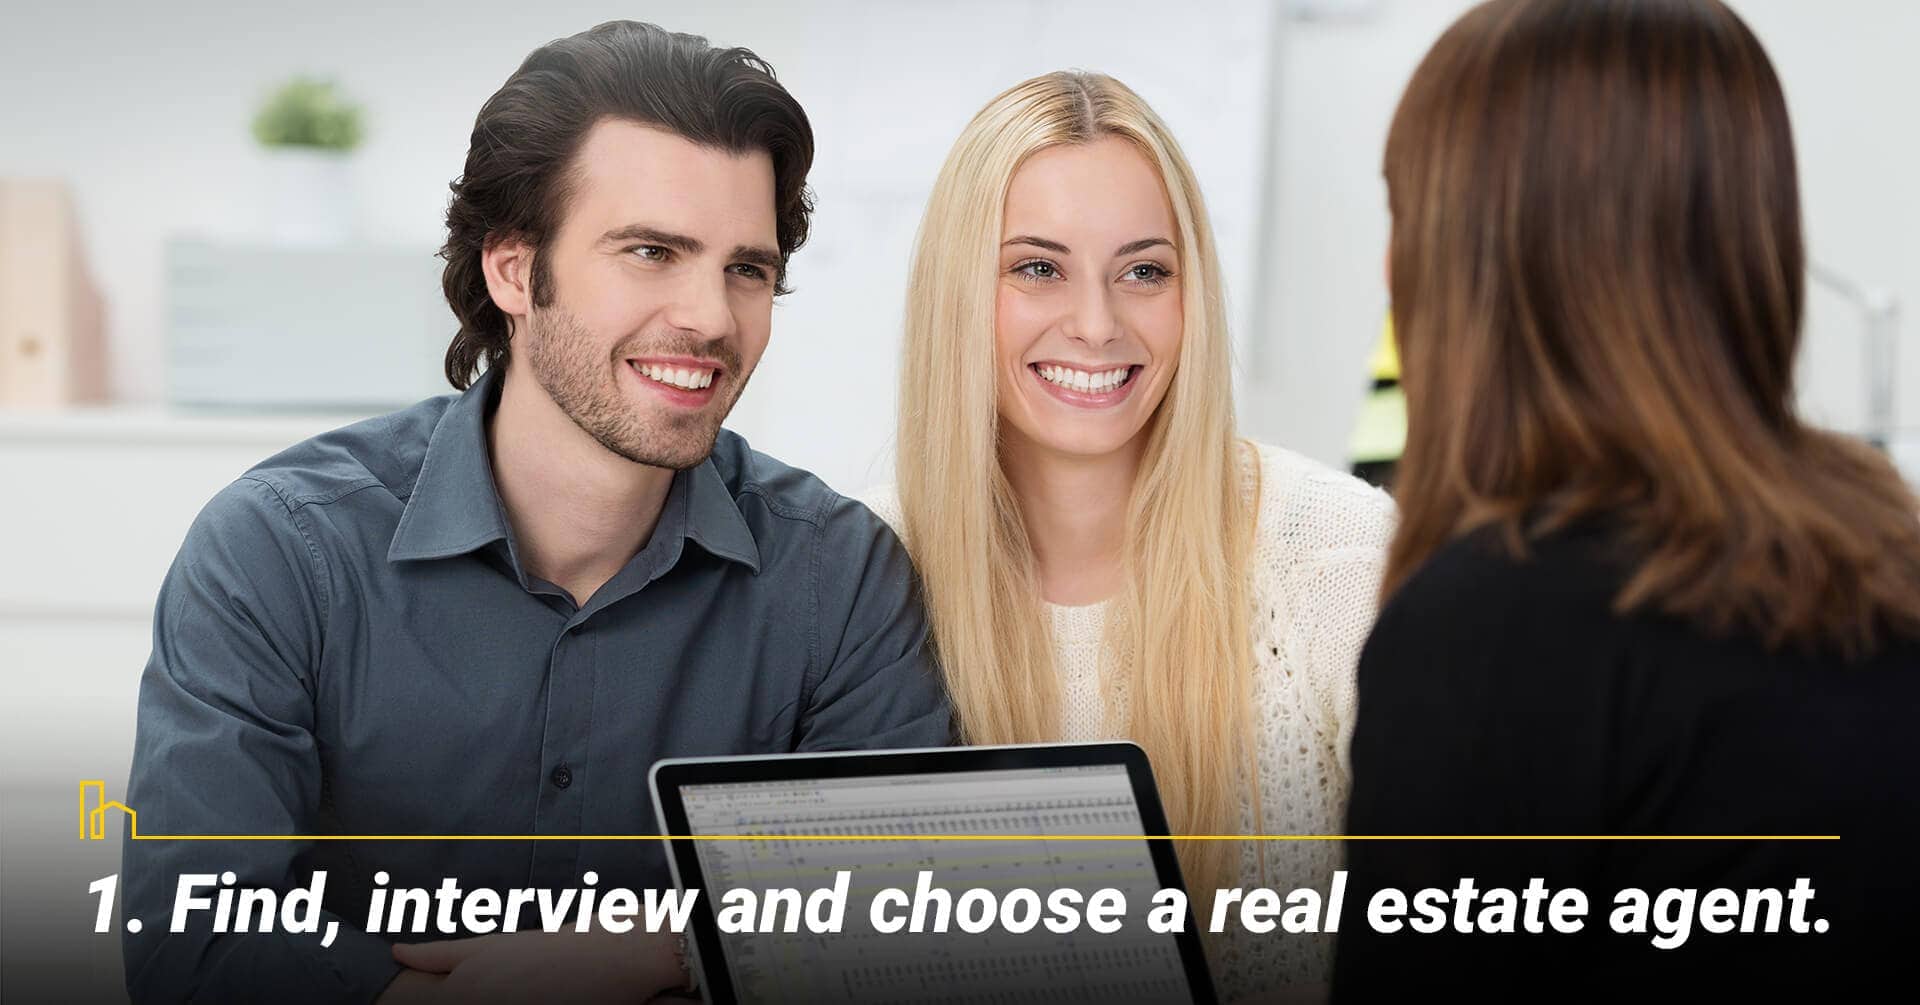 Find, interview and choose a real estate agent, work with a professional real estate agent